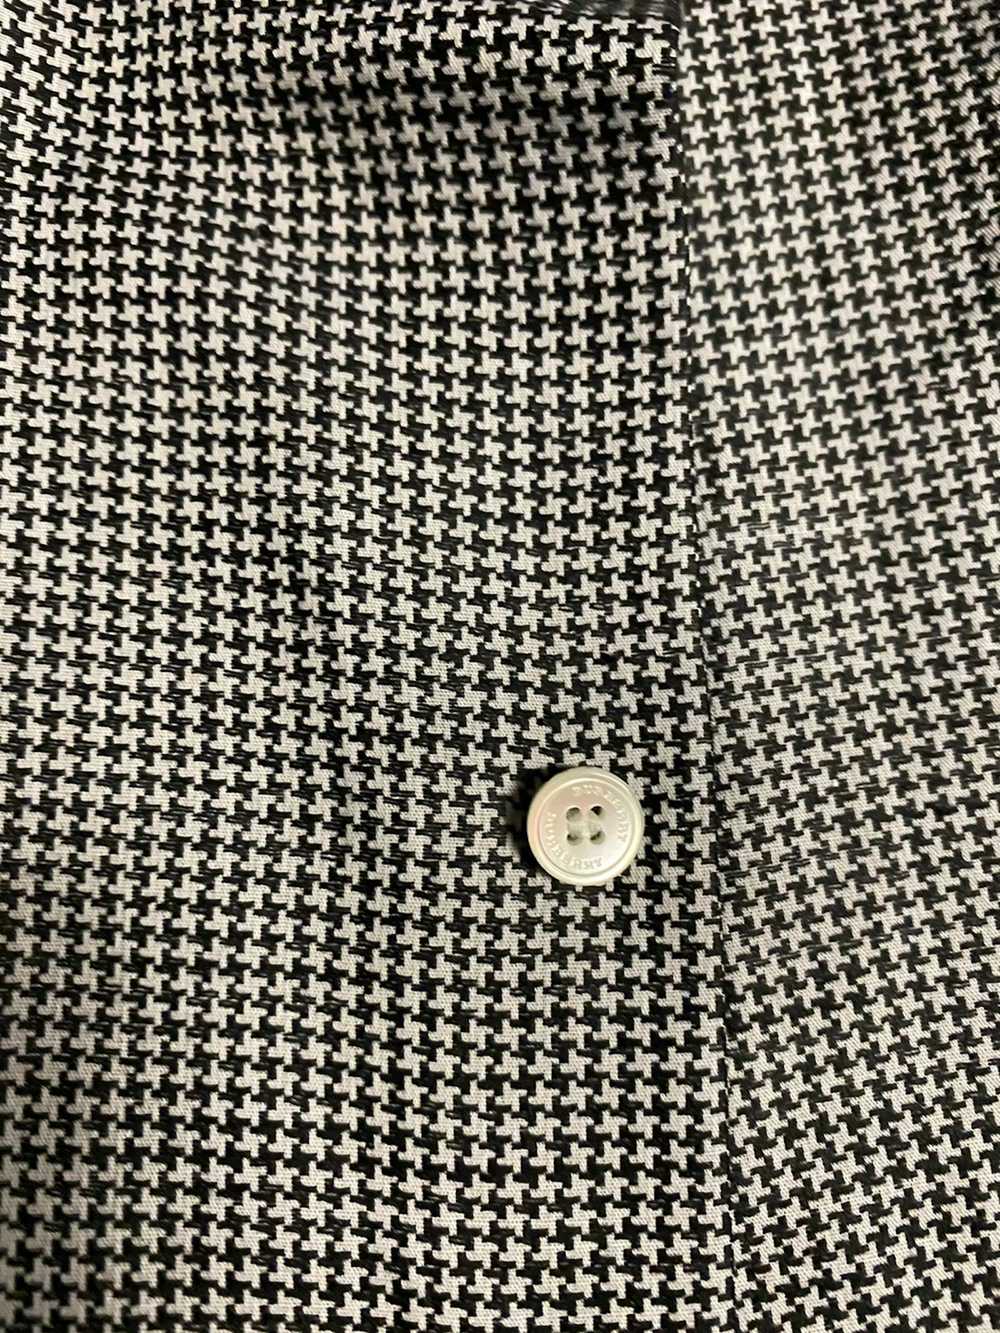 Burberry Burberry Button Up, Mint Condition - image 3